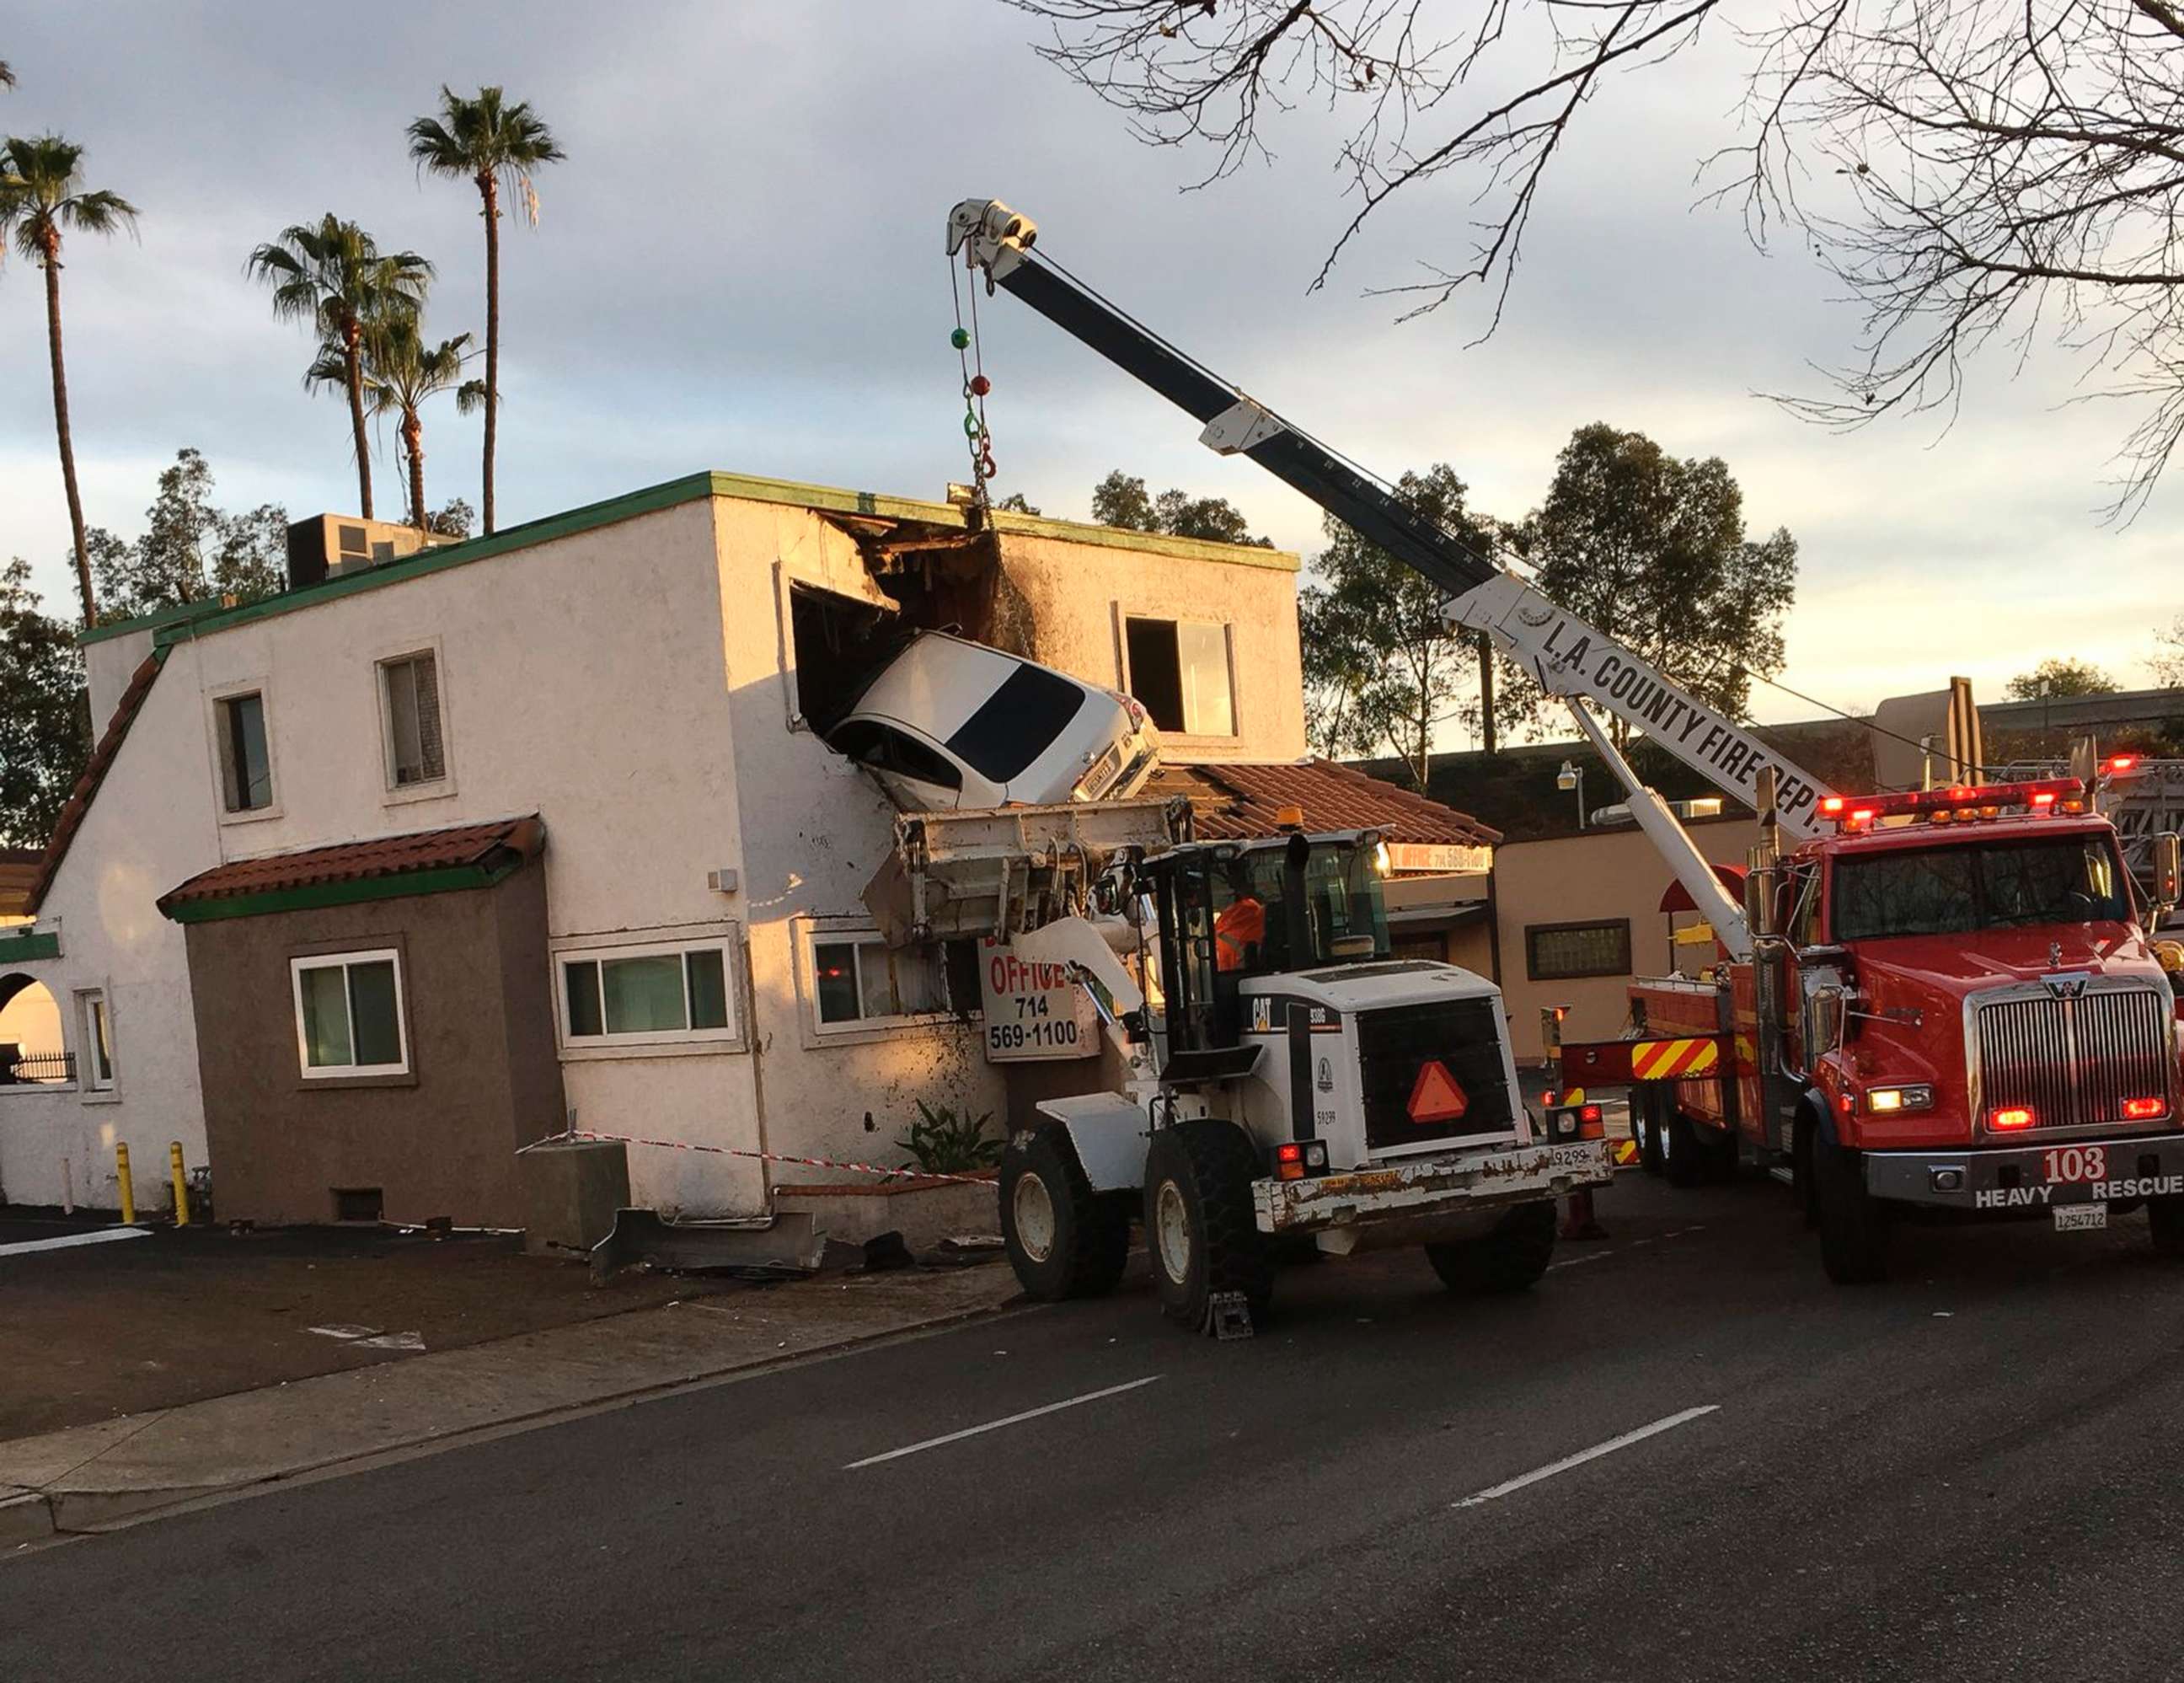 PHOTO: A crane is used to remove a vehicle hanging from a second story window after it hit a center divider and went airborne in Santa Ana, Calif., Jan. 14, 2018.